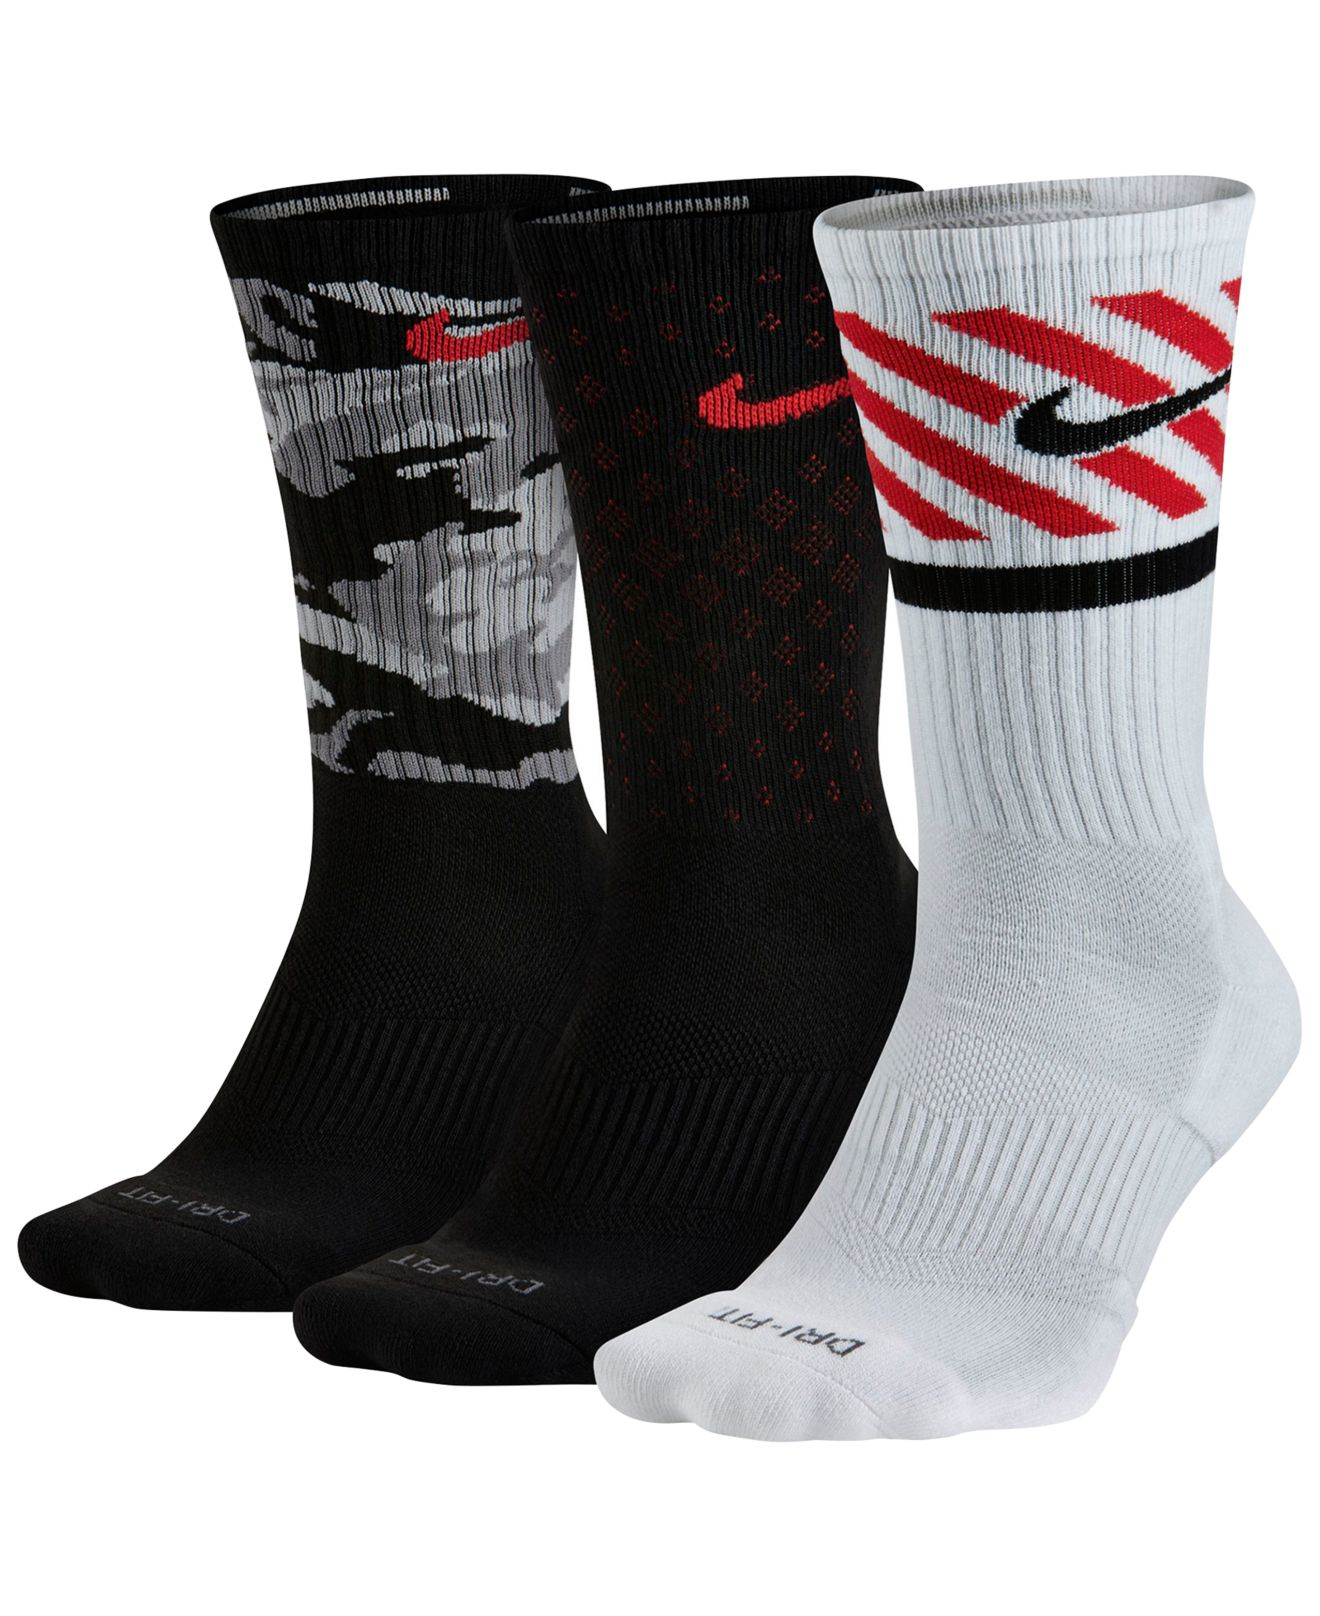 List 91+ Pictures Images Of Nike Socks Excellent